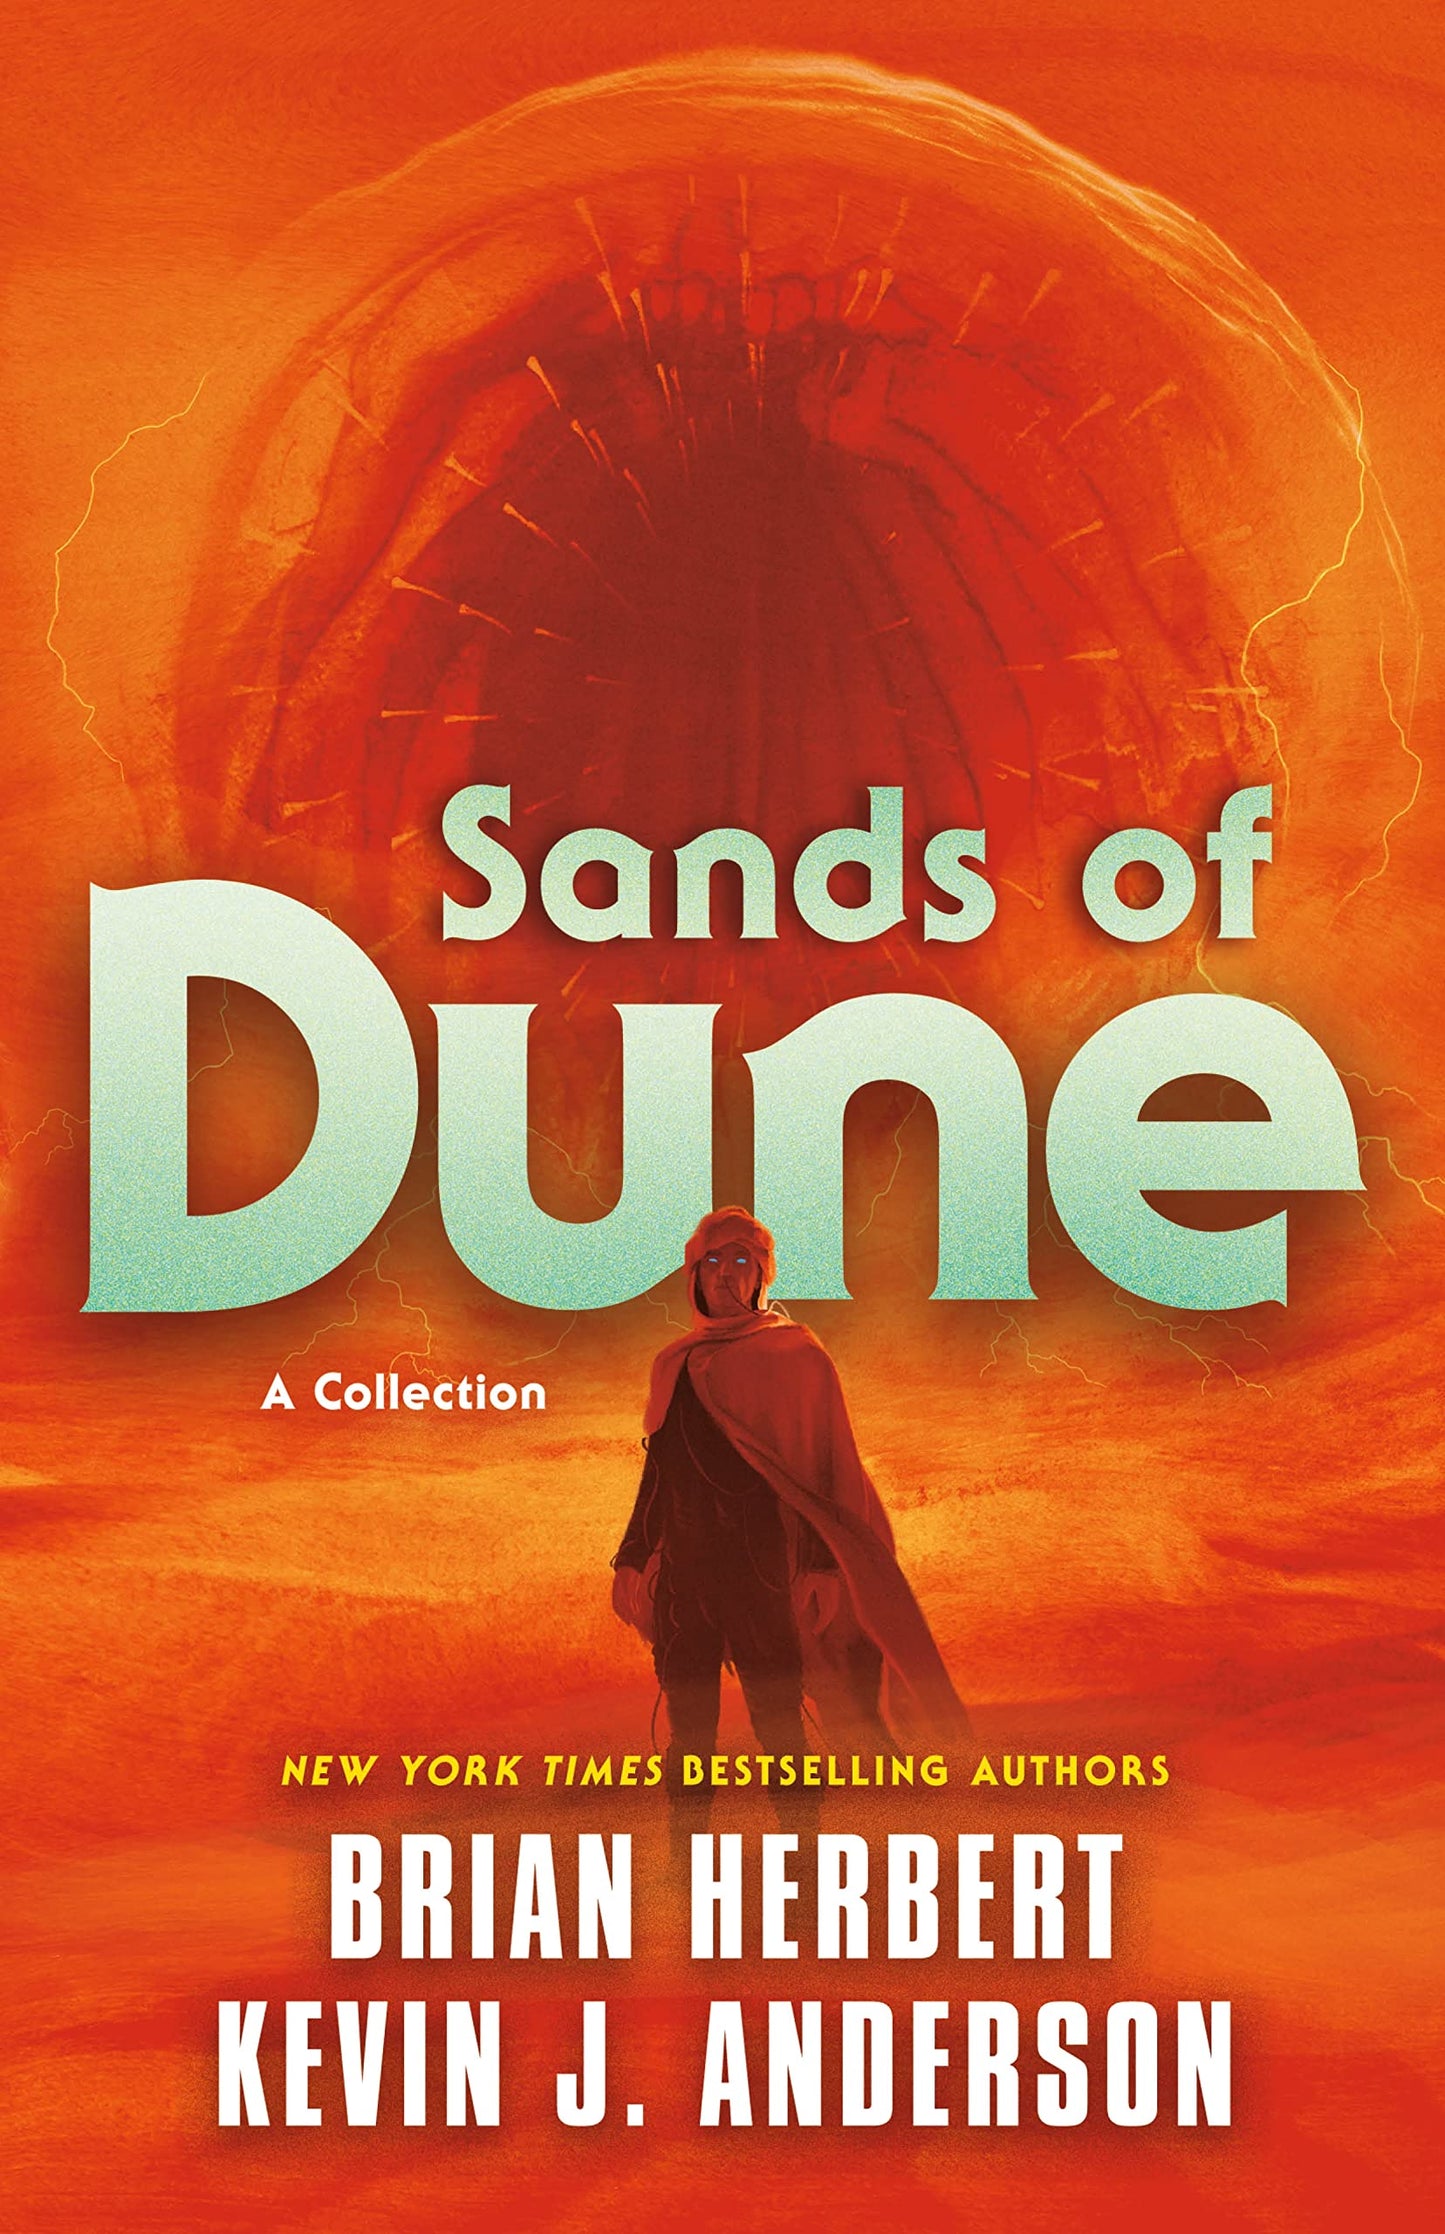 Sands of Dune by Brian Herbert & Kevin J. Anderson